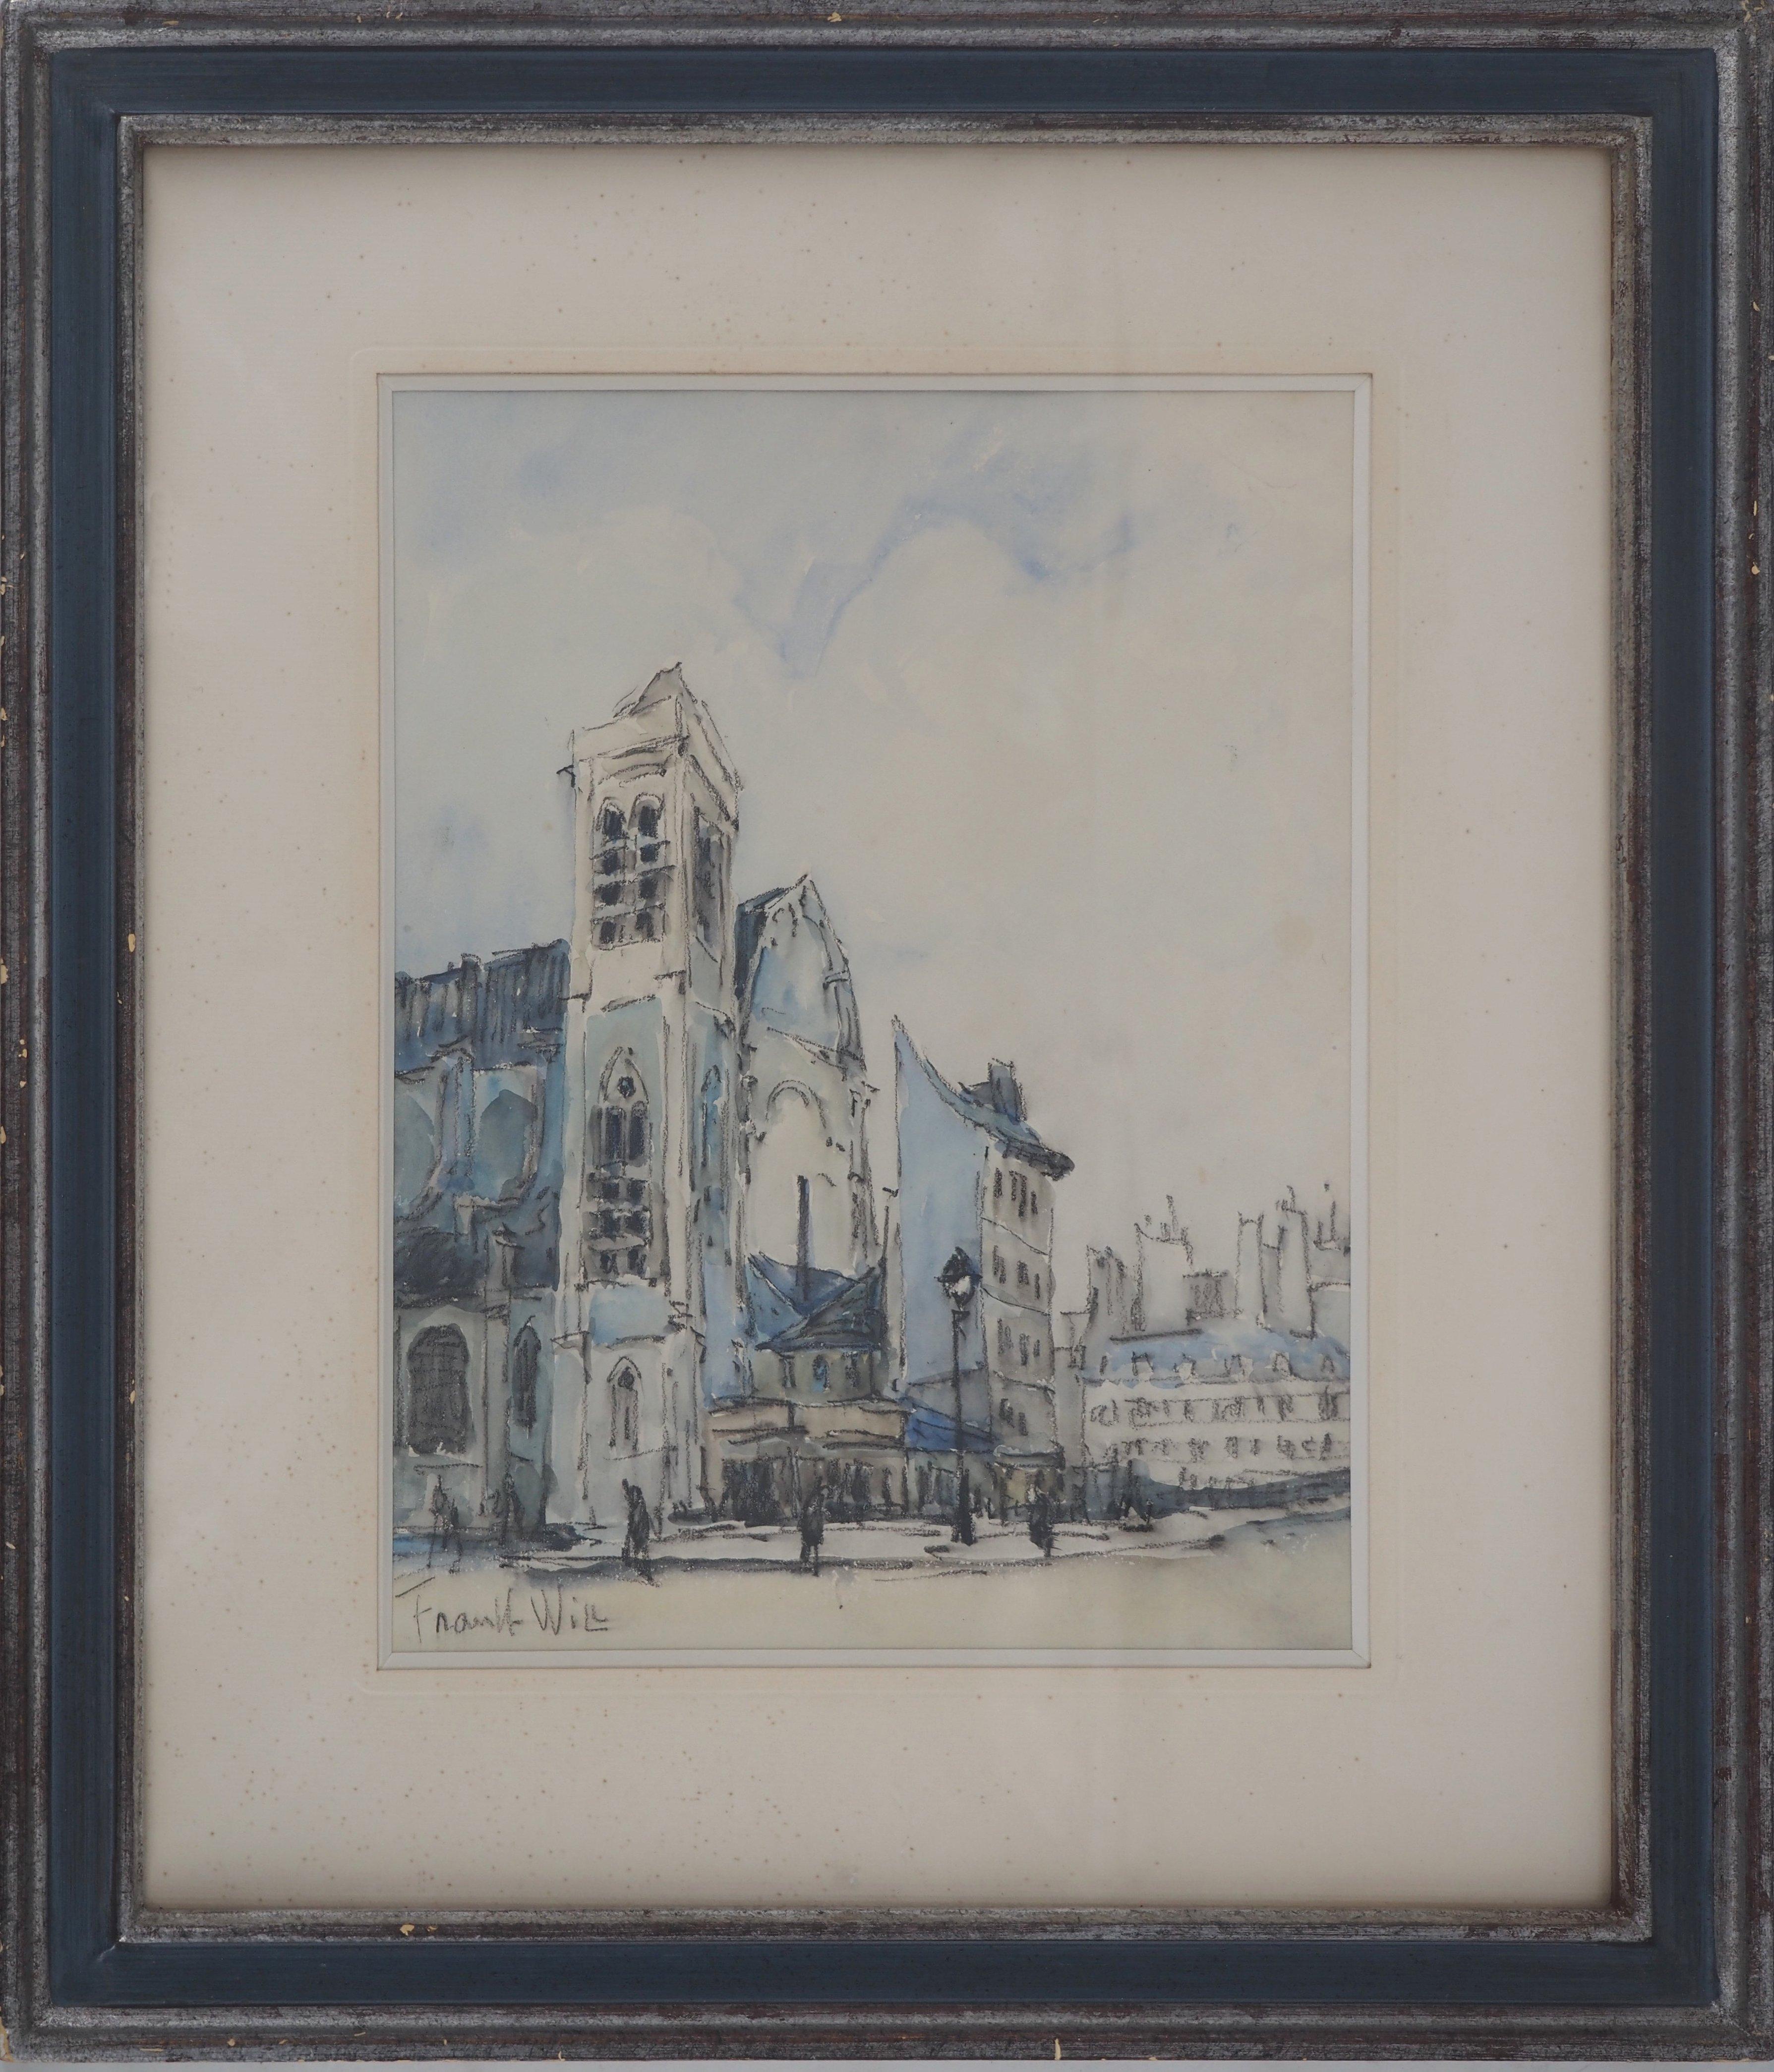 Frank Will Landscape Art - Old Church in Paris - Original Watercolor, Signed